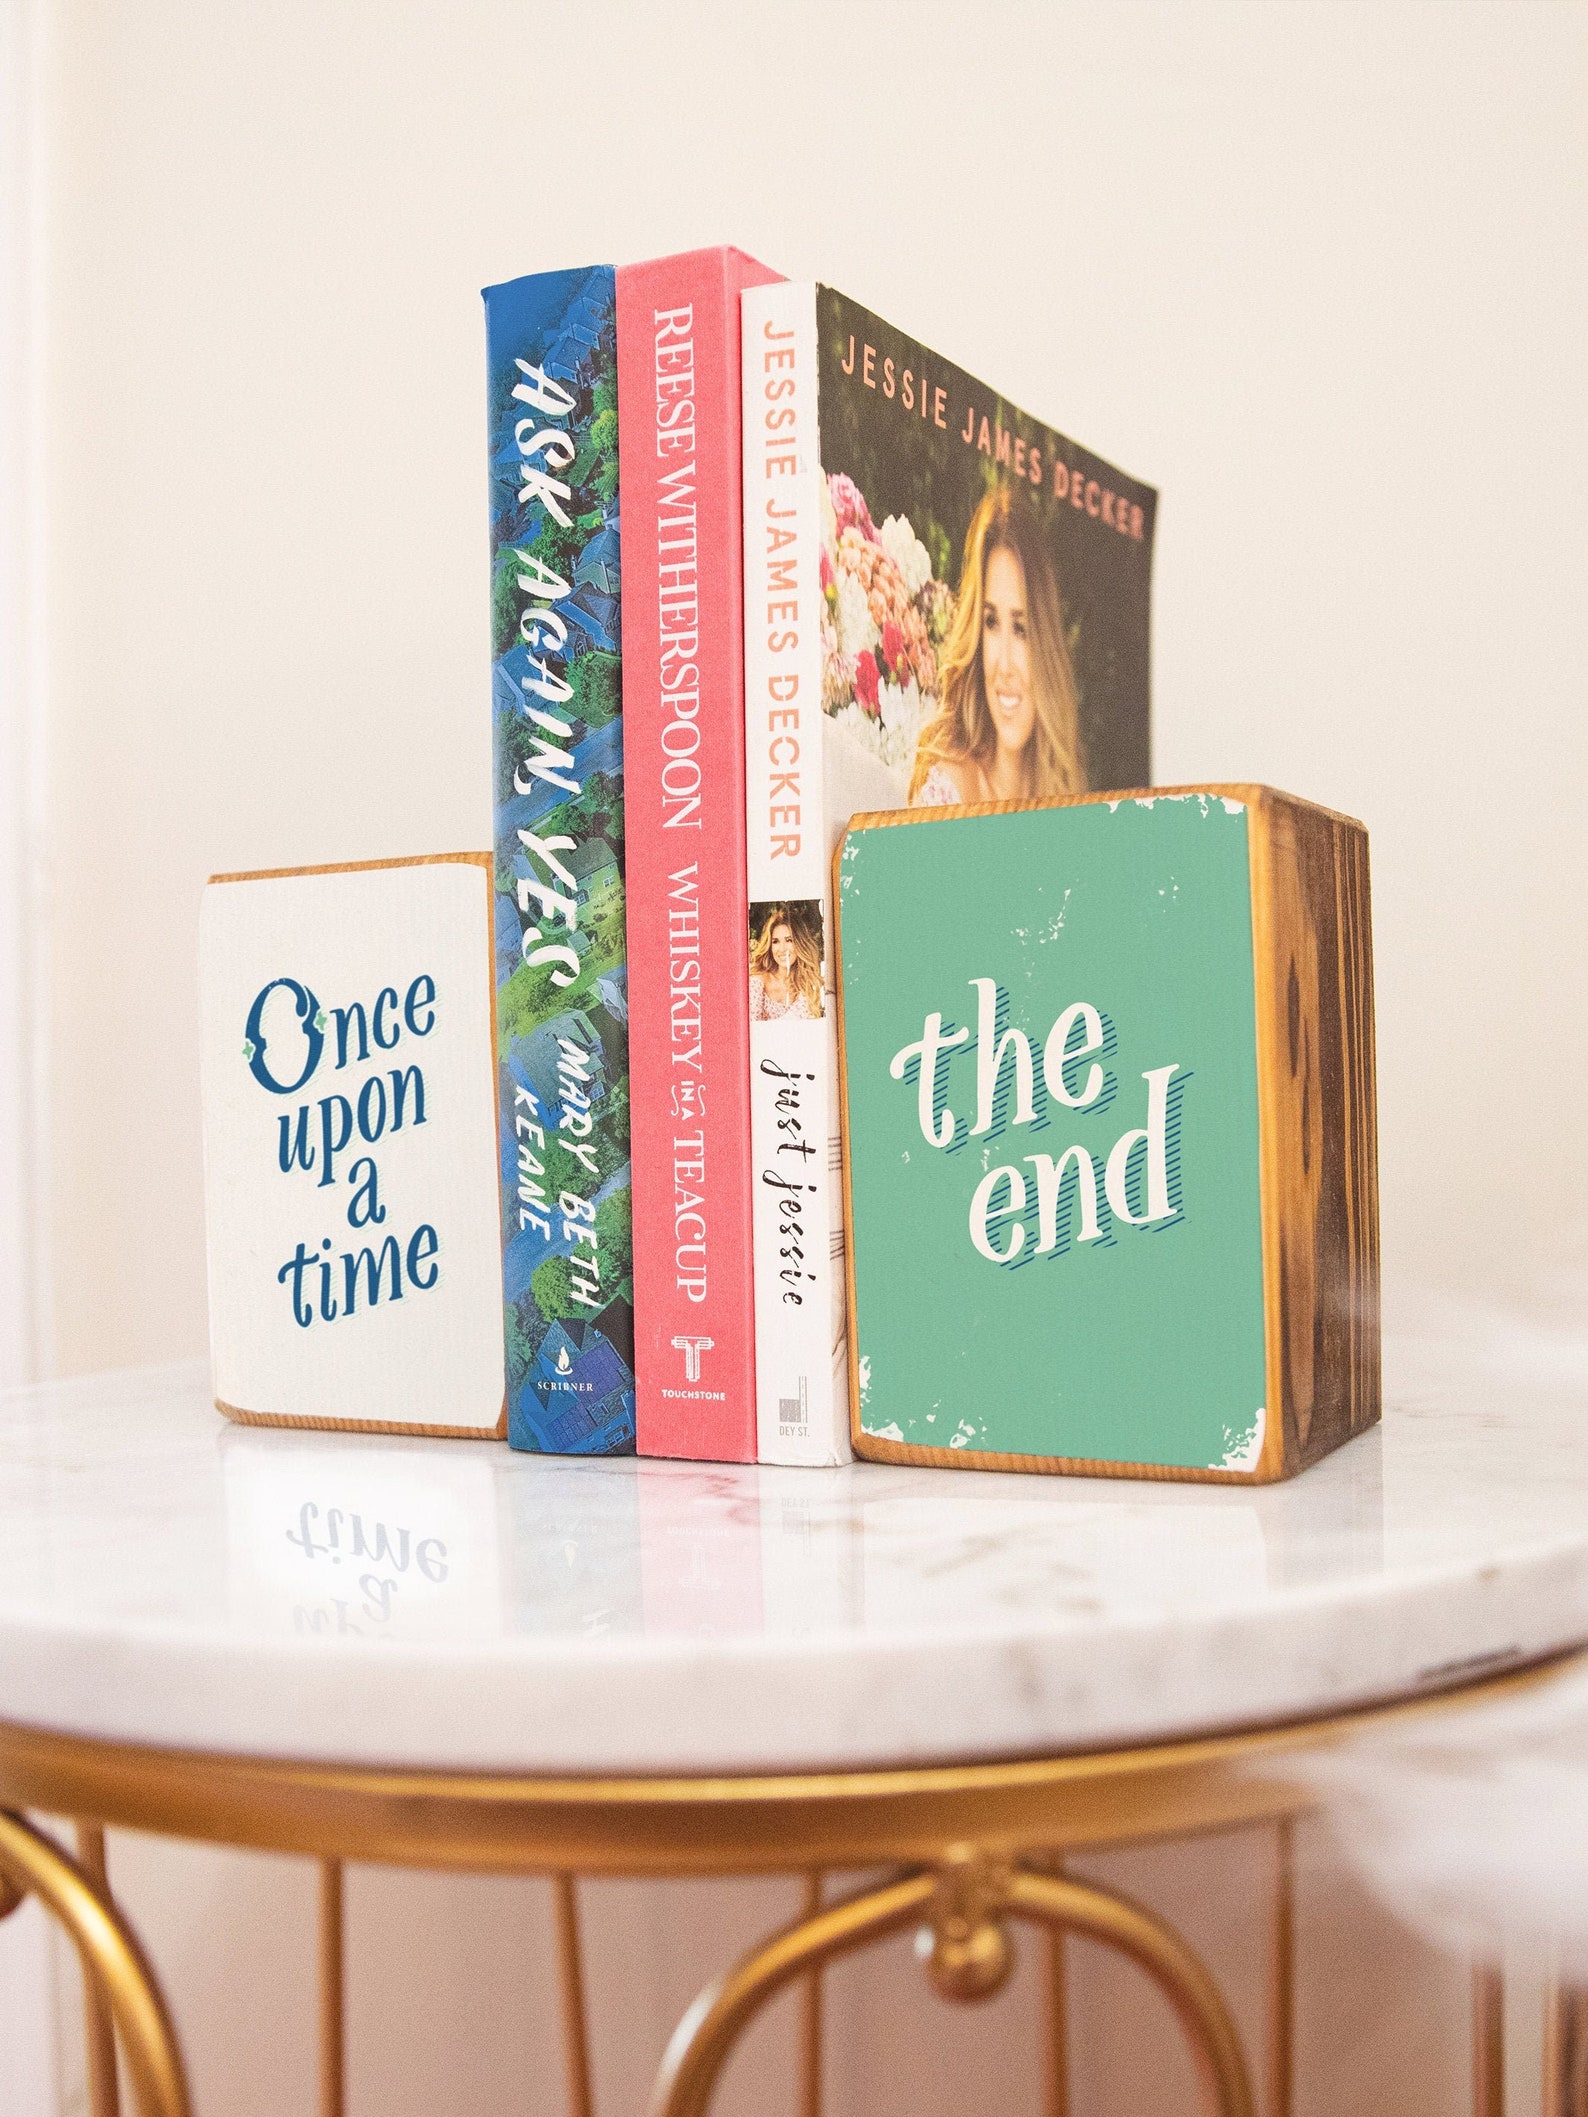 Two wooden blocks printed with the words "Once Upon a Time" and "the end" hold up three books.